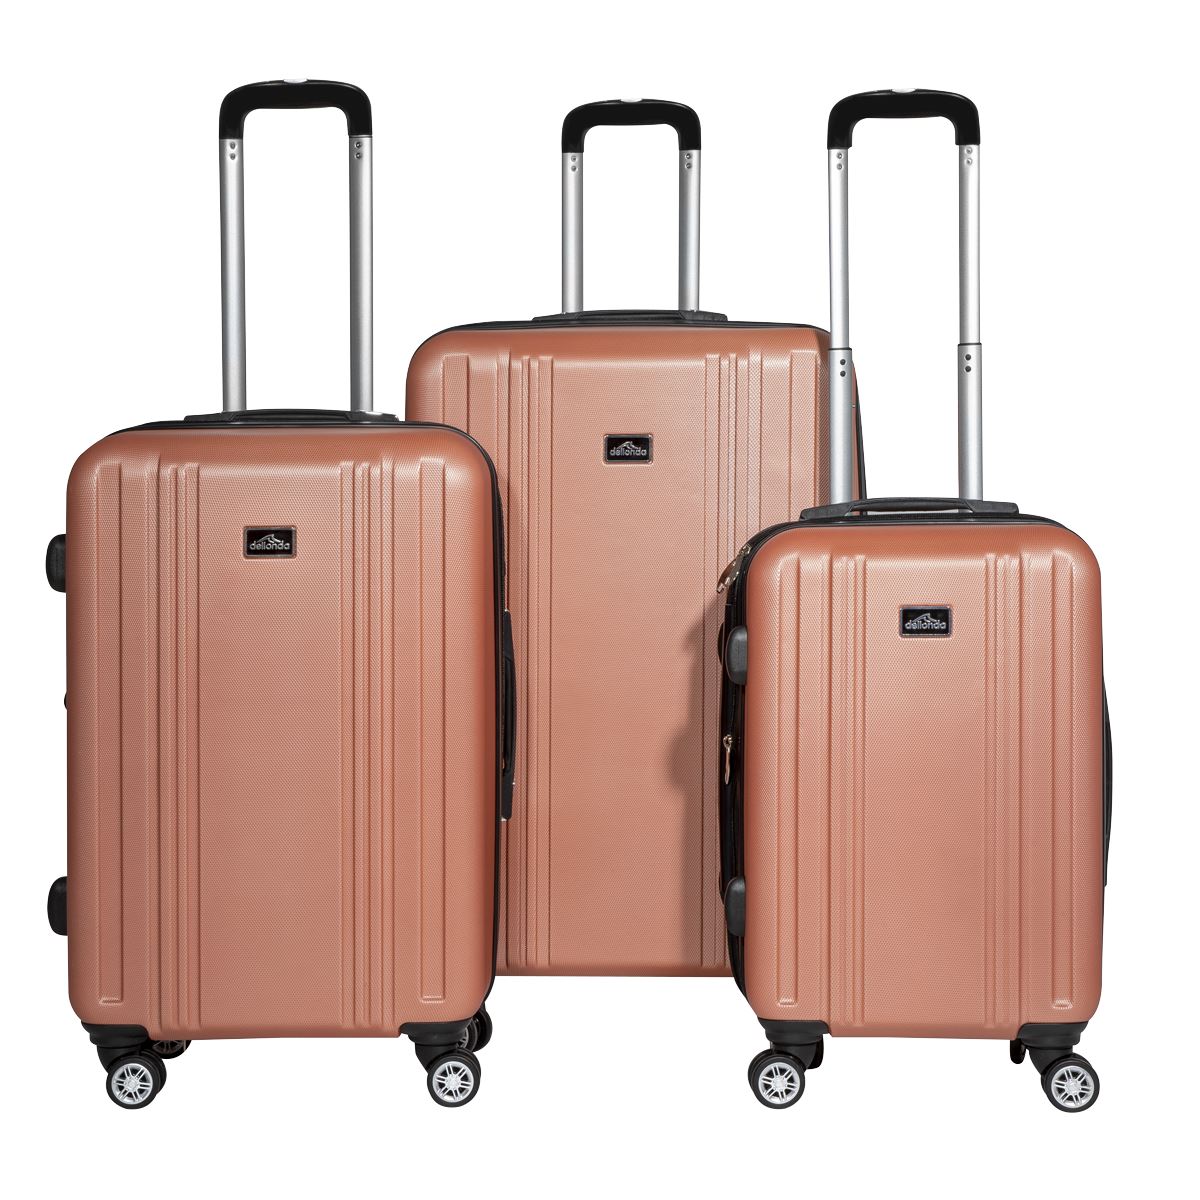 Dellonda 3-Piece Lightweight ABS Luggage Set with Integrated TSA Approved Combination Lock - Rose Gold - DL125